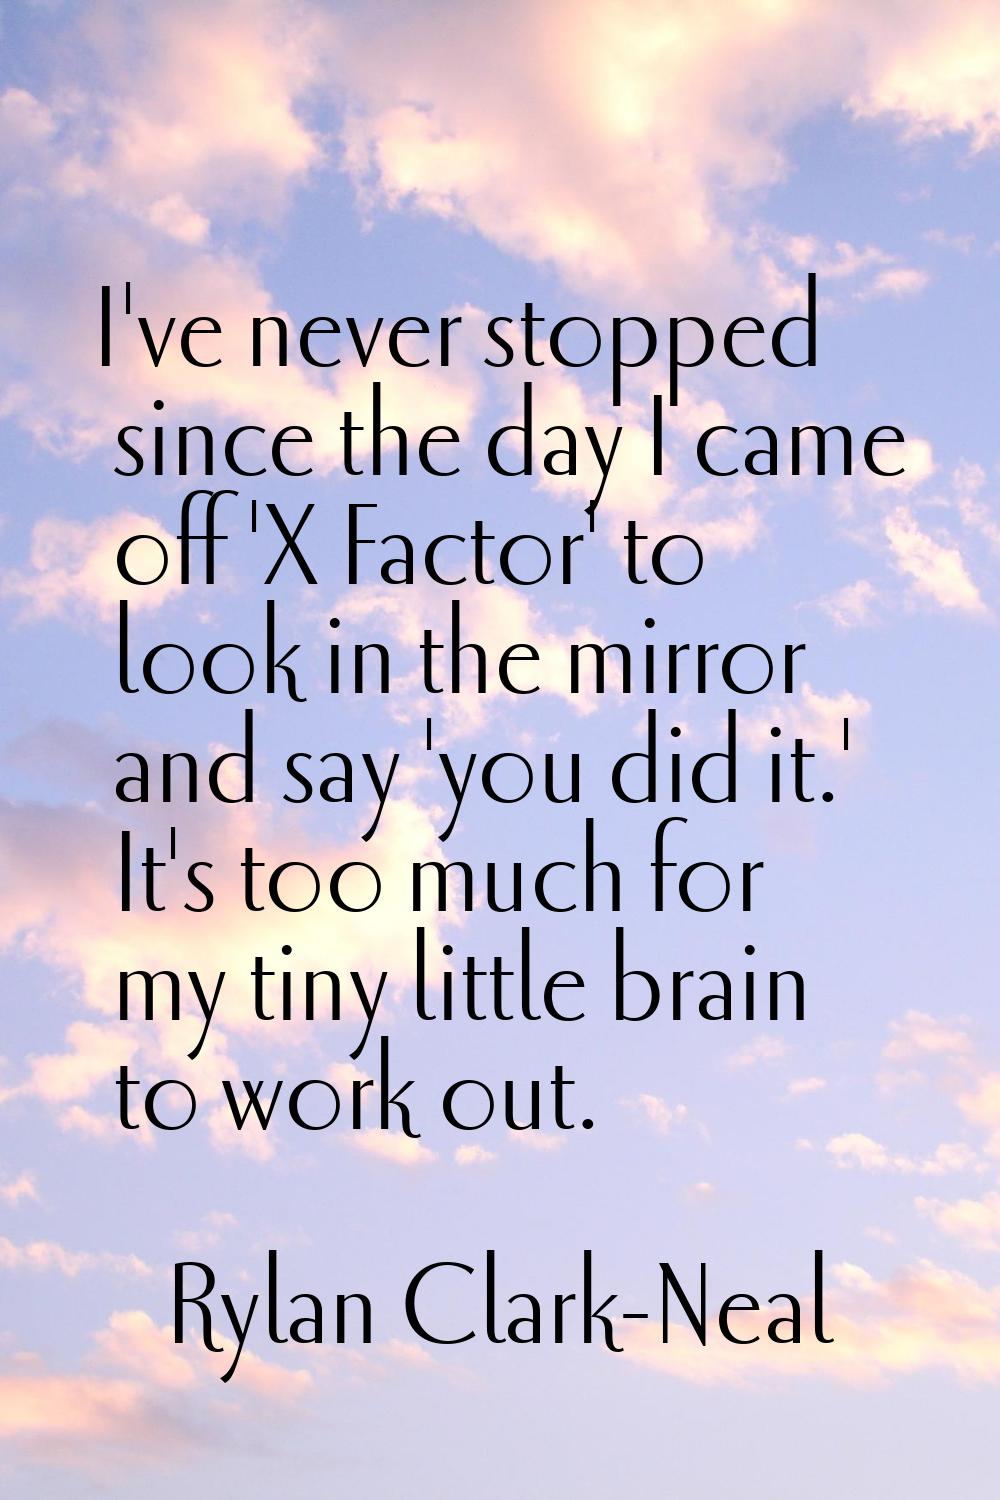 I've never stopped since the day I came off 'X Factor' to look in the mirror and say 'you did it.' 